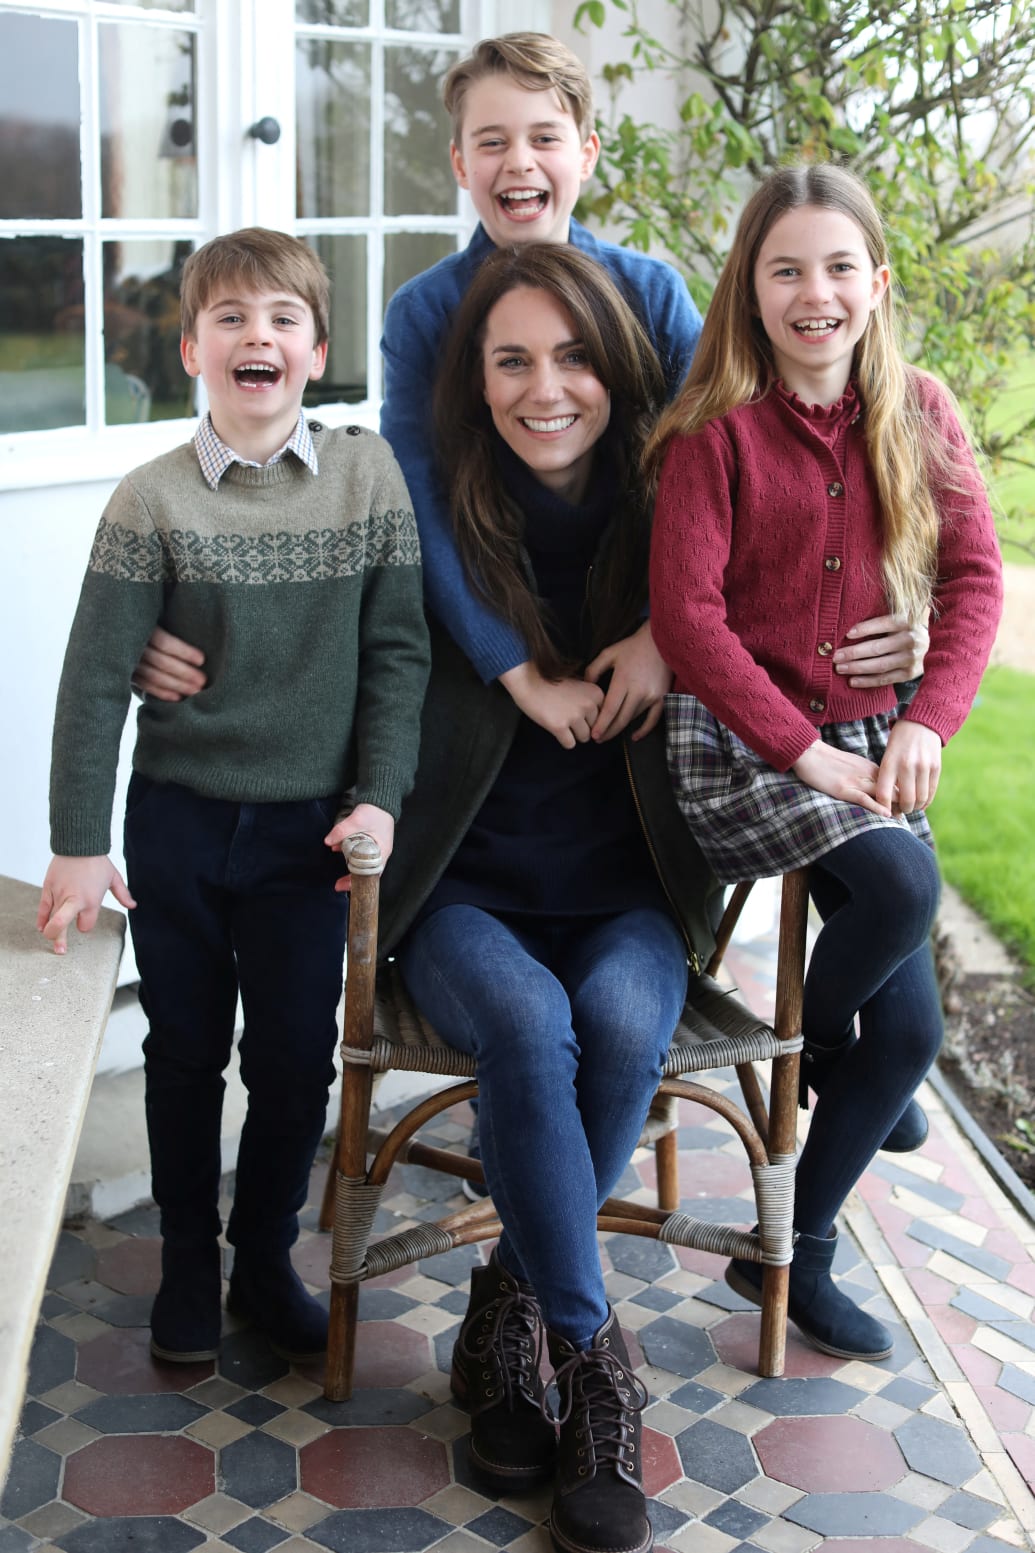 The U.K. Mother's Day photograph Prince William reportedly took of Kate Middleton and their children that Kate later admitted she had doctored.